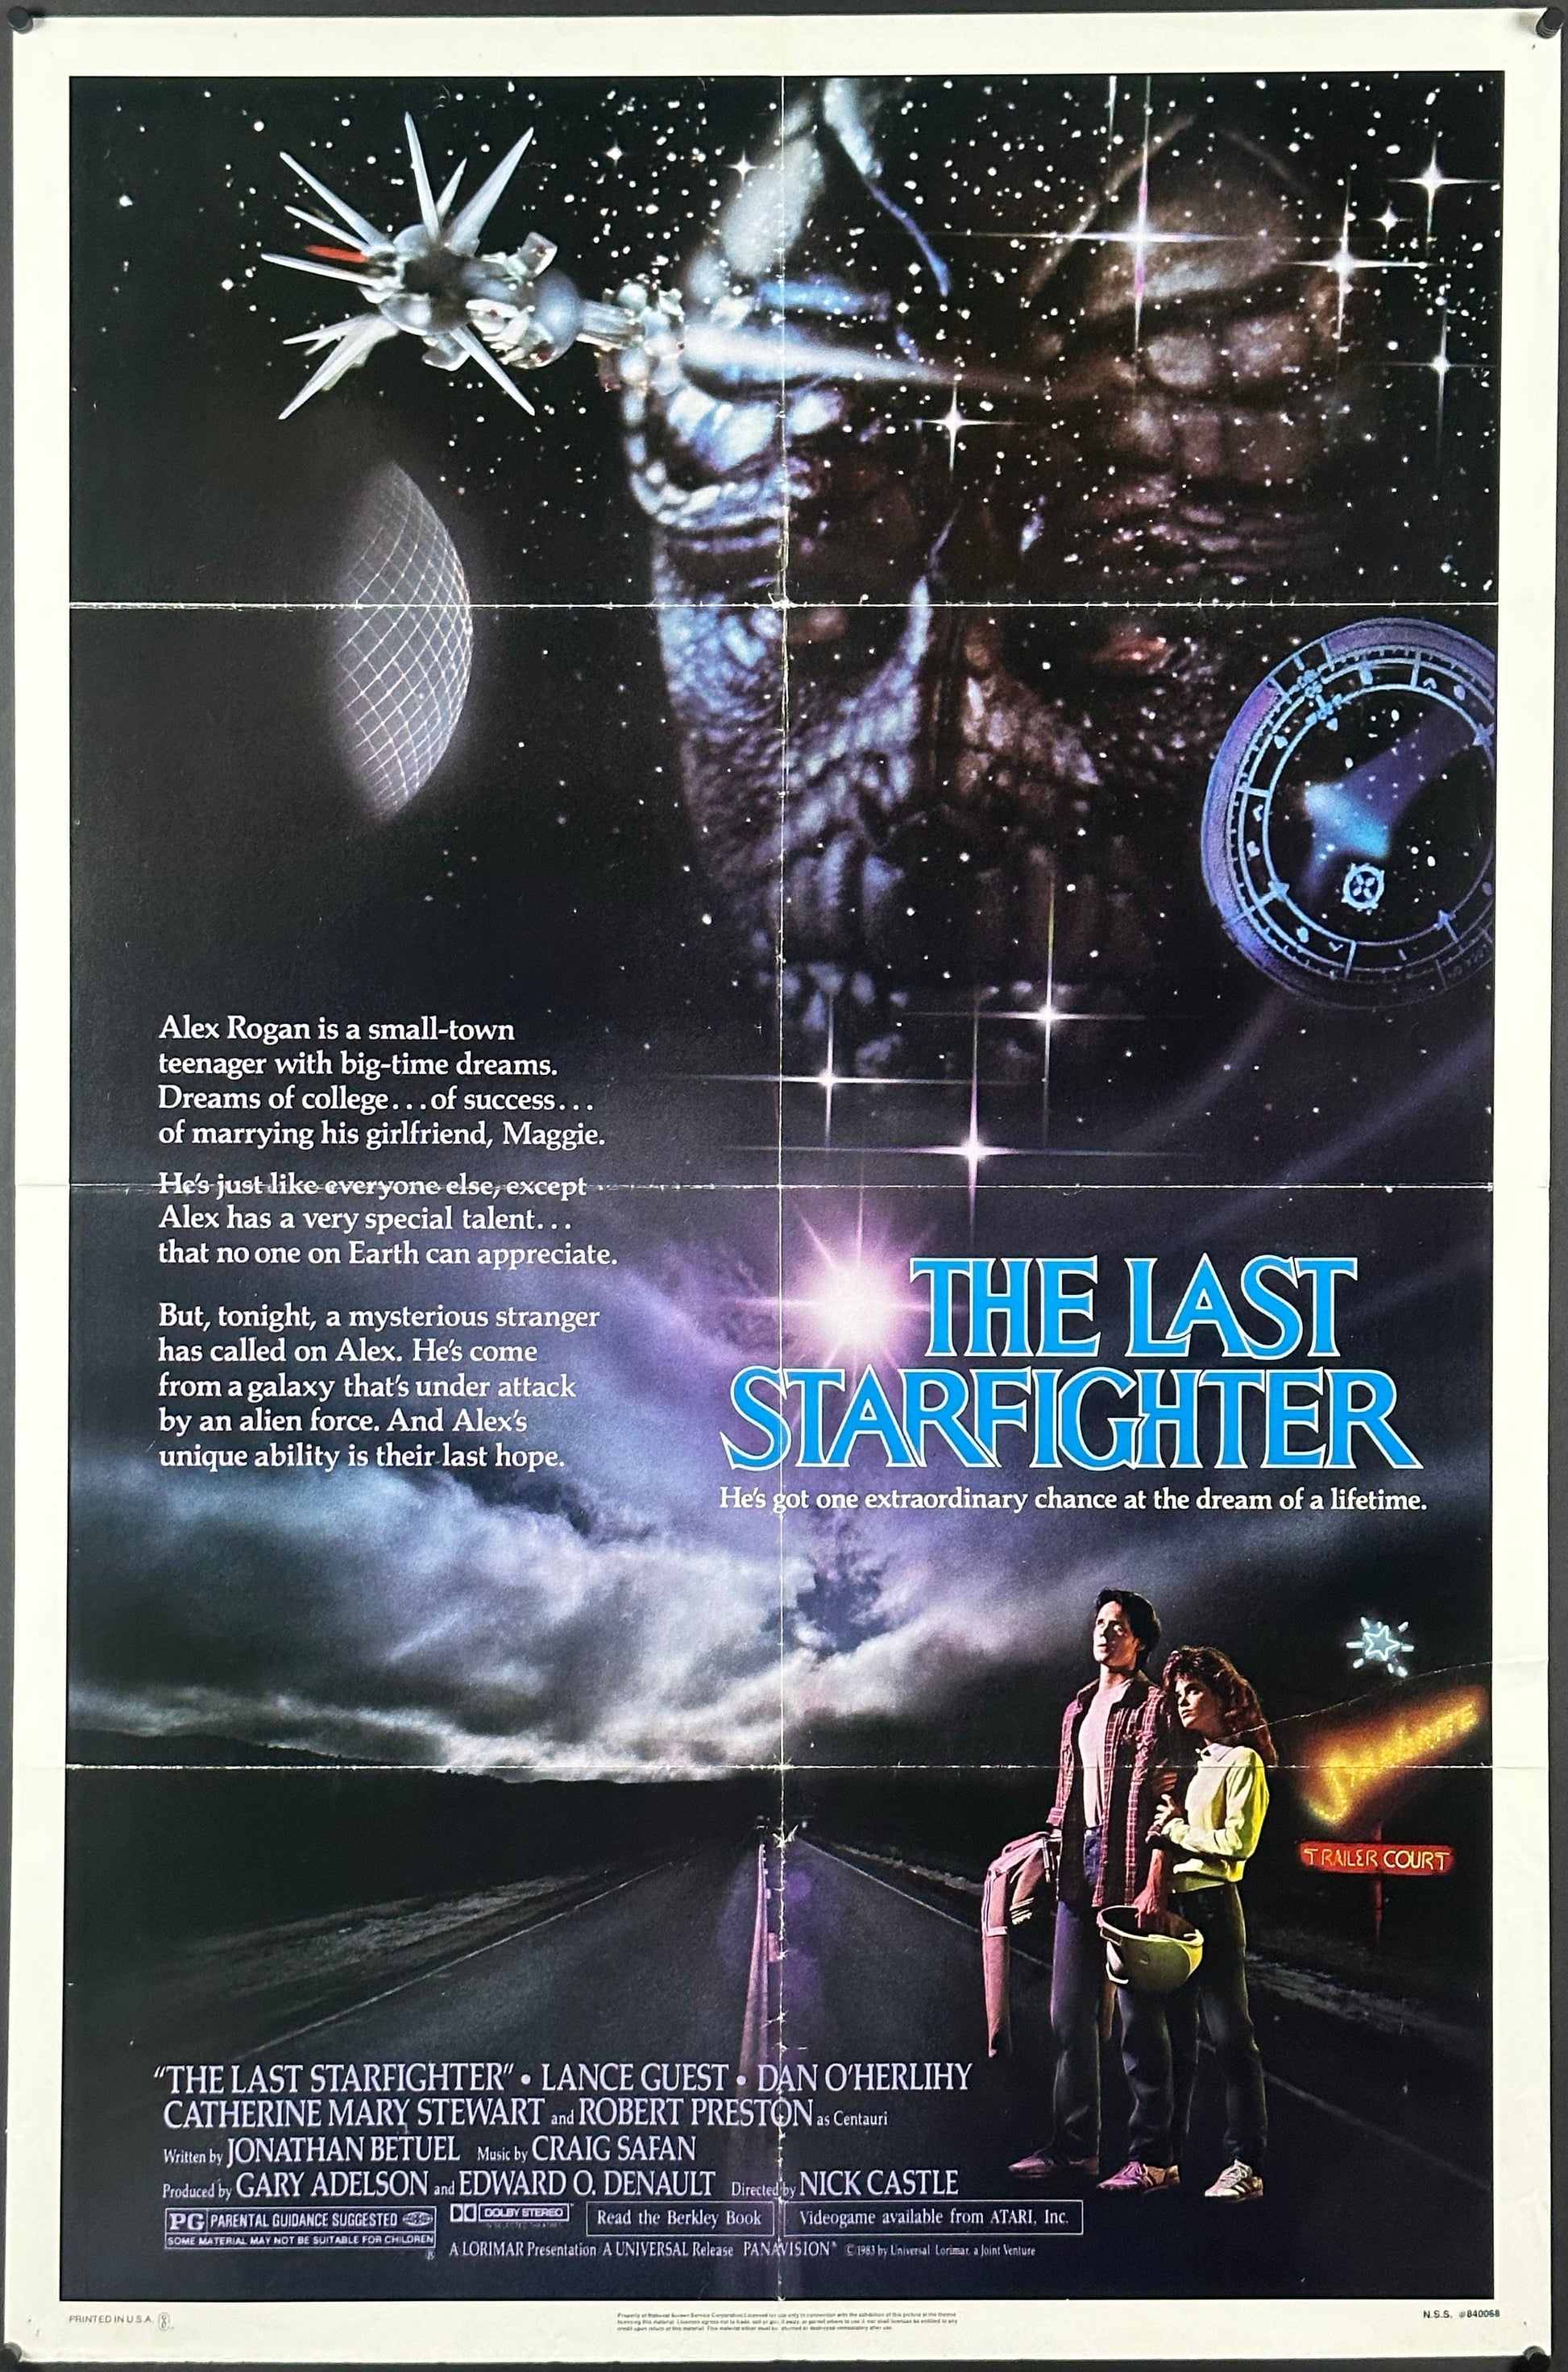 The Last Starfighter - posterpalace.com